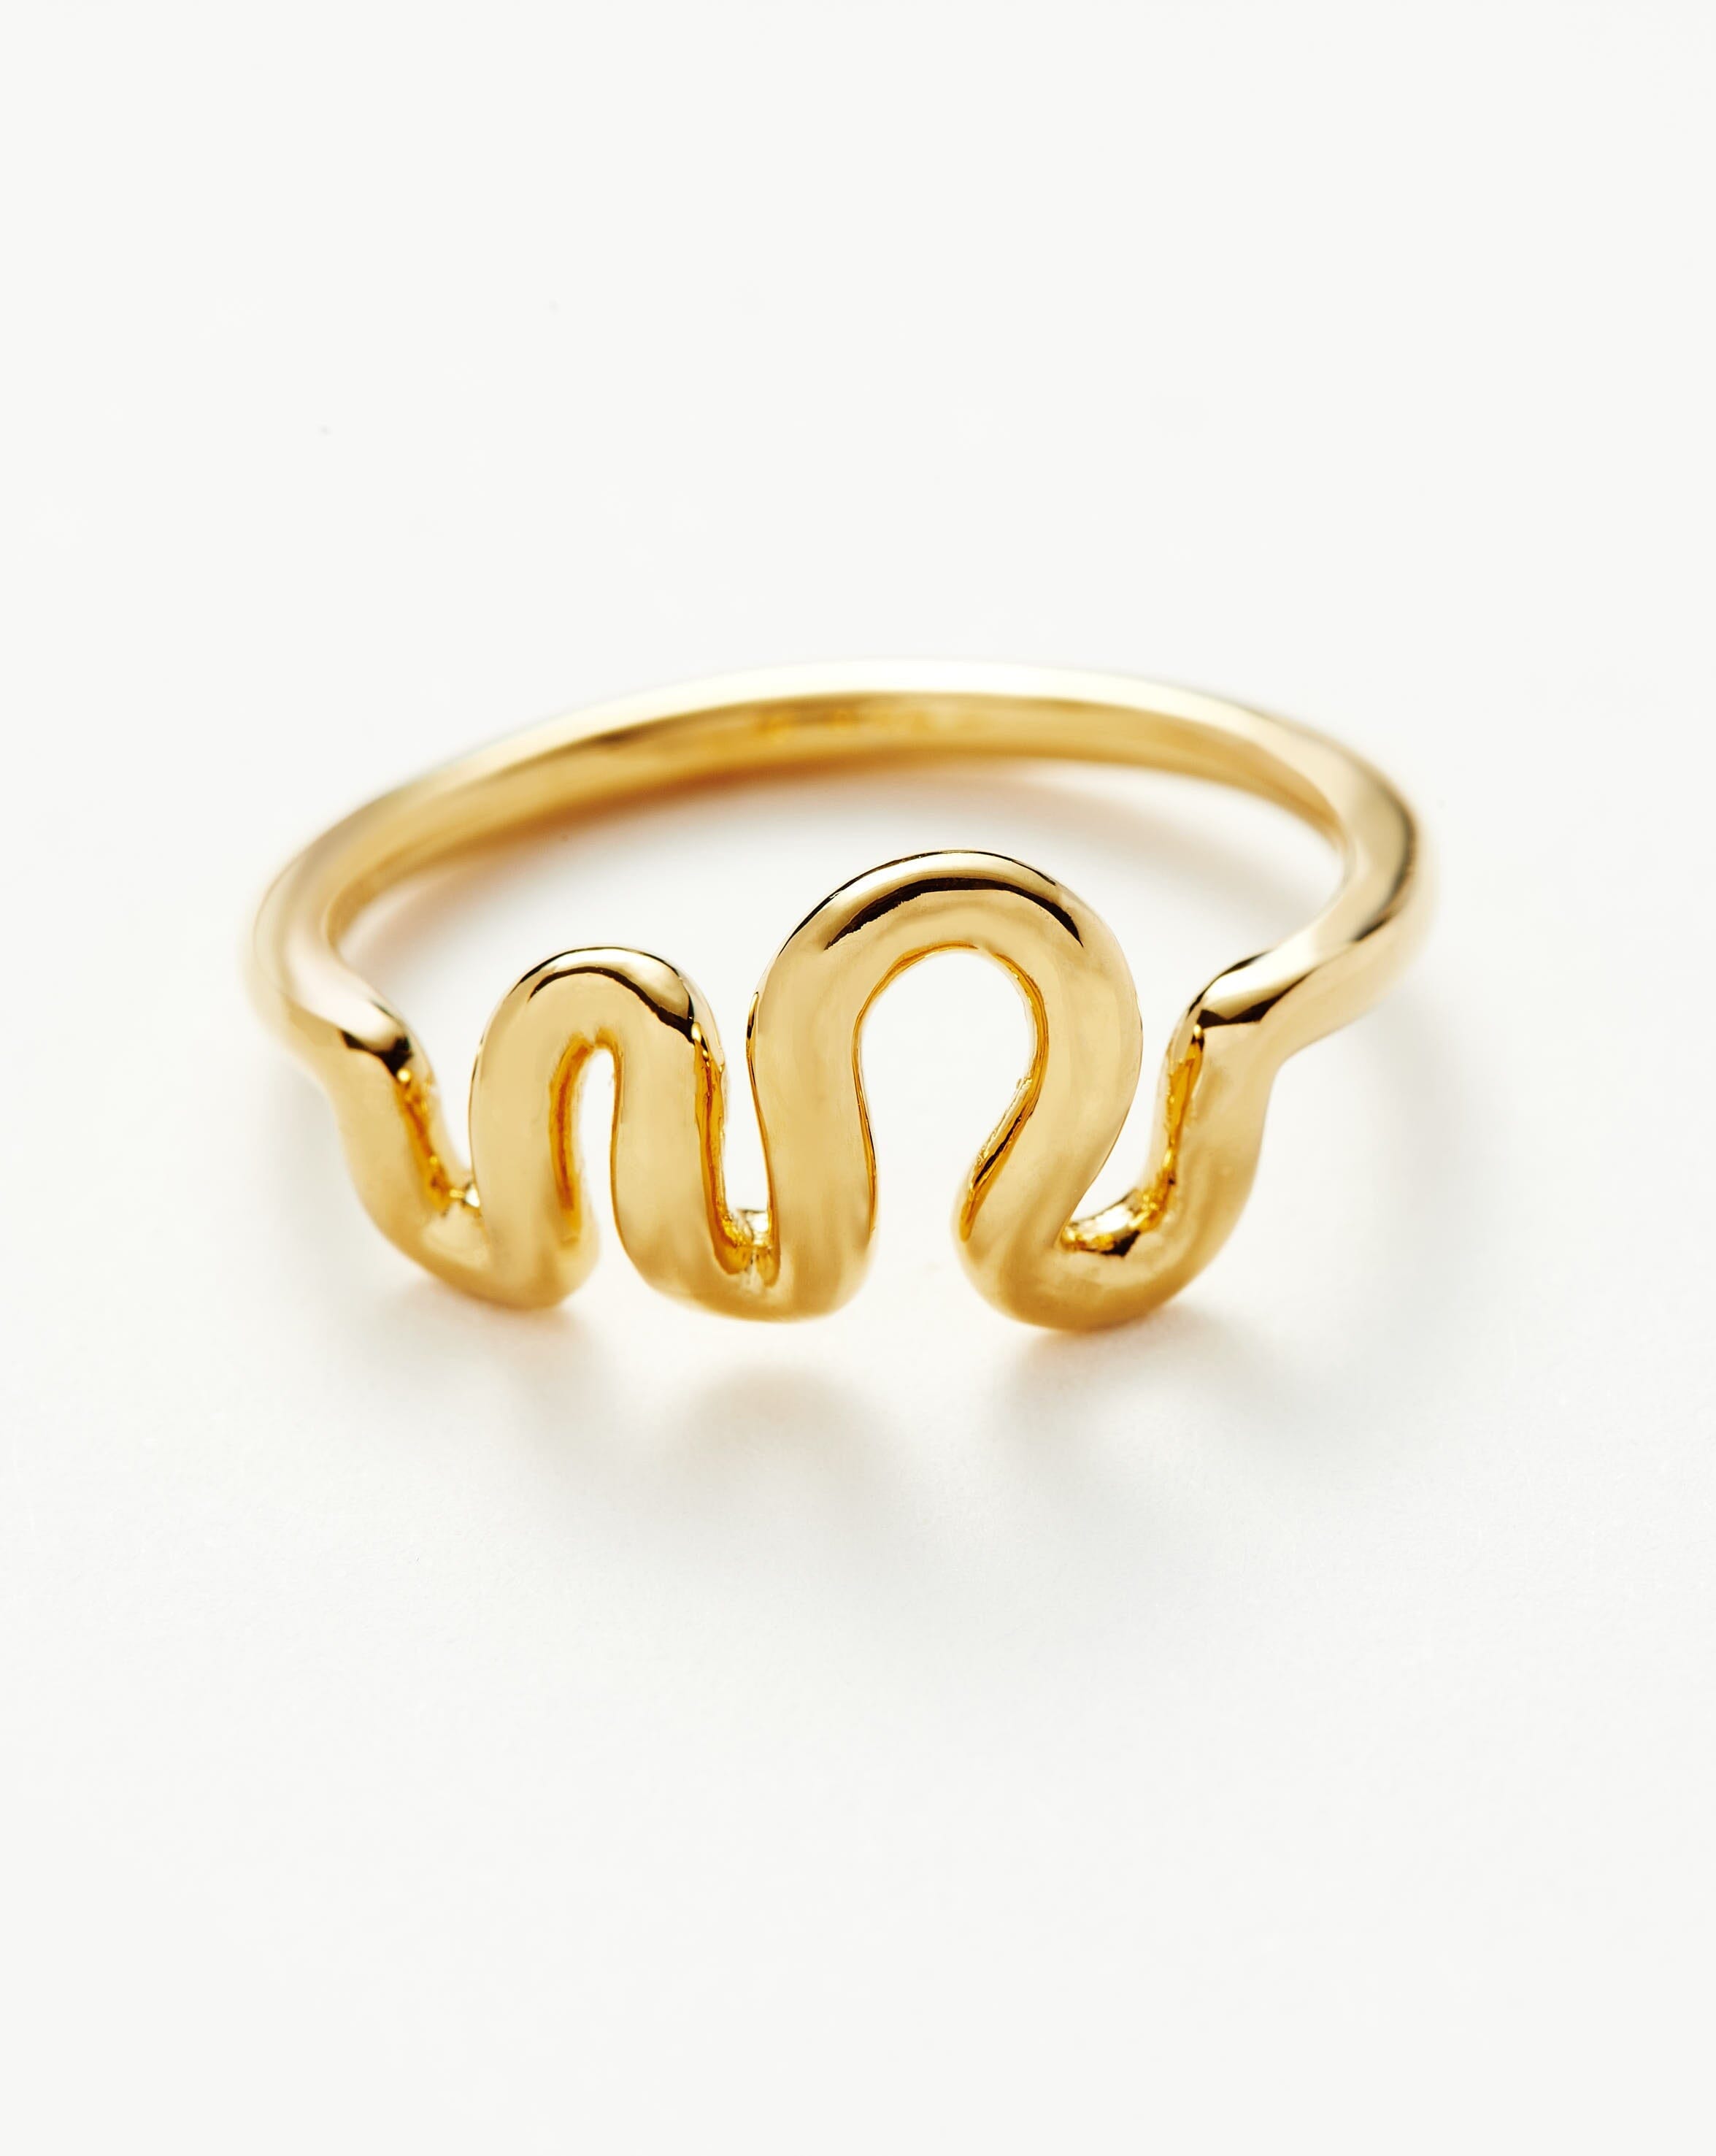 Missoma Squiggle Curve Two Tone Enamel Stacking Ring | 18ct Gold Plated Vermeil/Hot Pink Gold/Pink